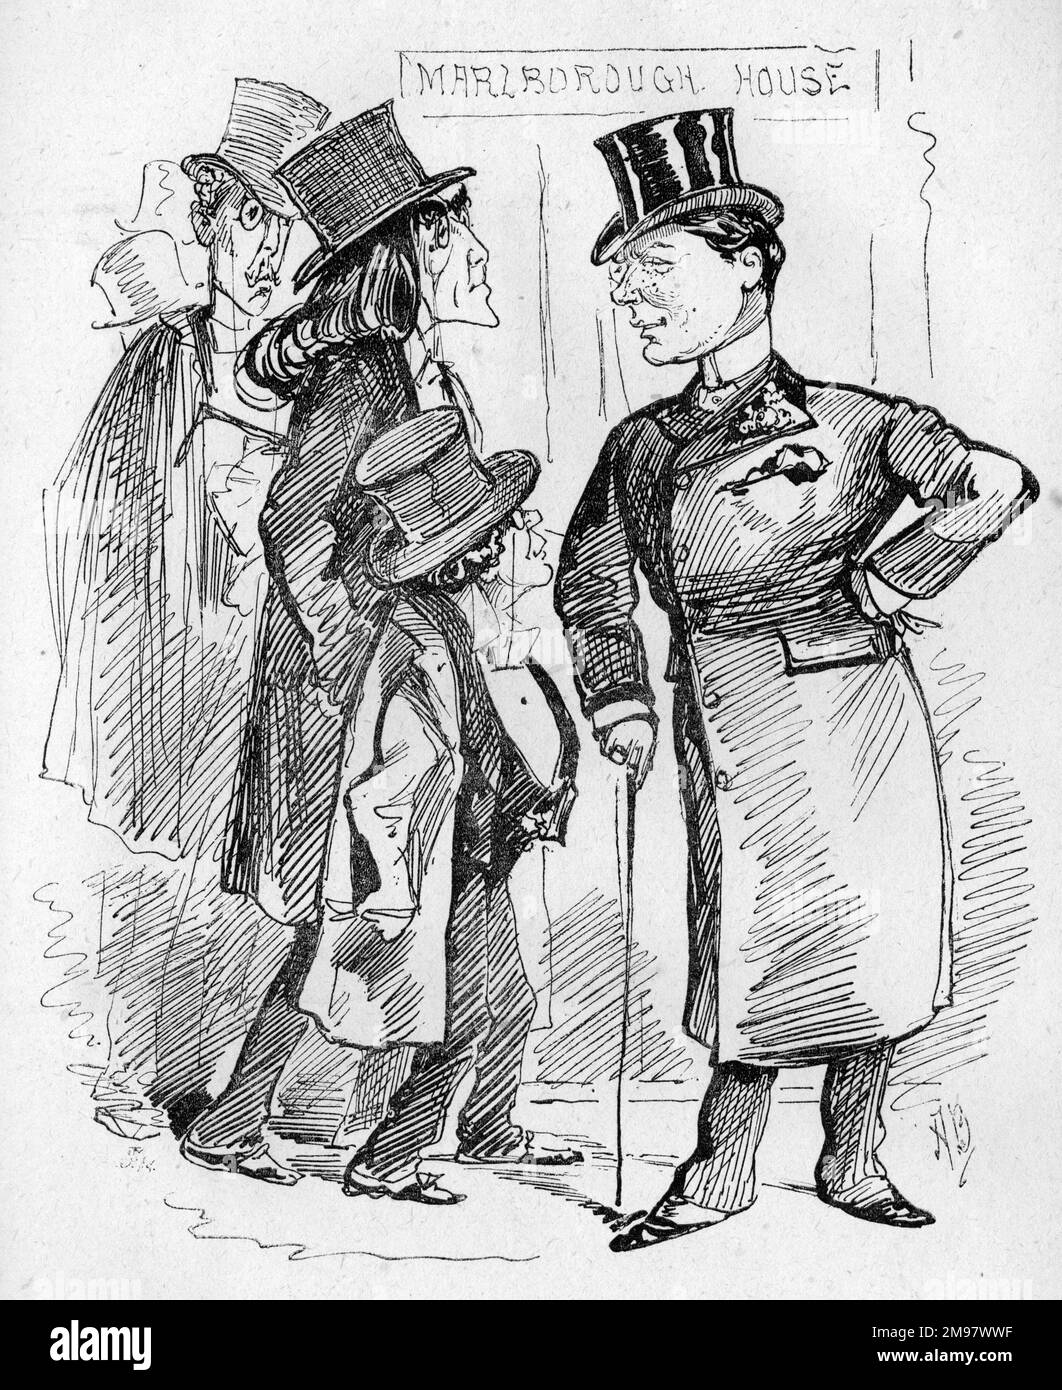 Cartoon, A G Vance and fellow-theatricals Henry Irving, Squire Bancroft and J L Toole.  Vance comments on the fact that they are going to visit the Prince of Wales at Marlborough House -- not to seem left out, he says he did it years ago himself. Stock Photo